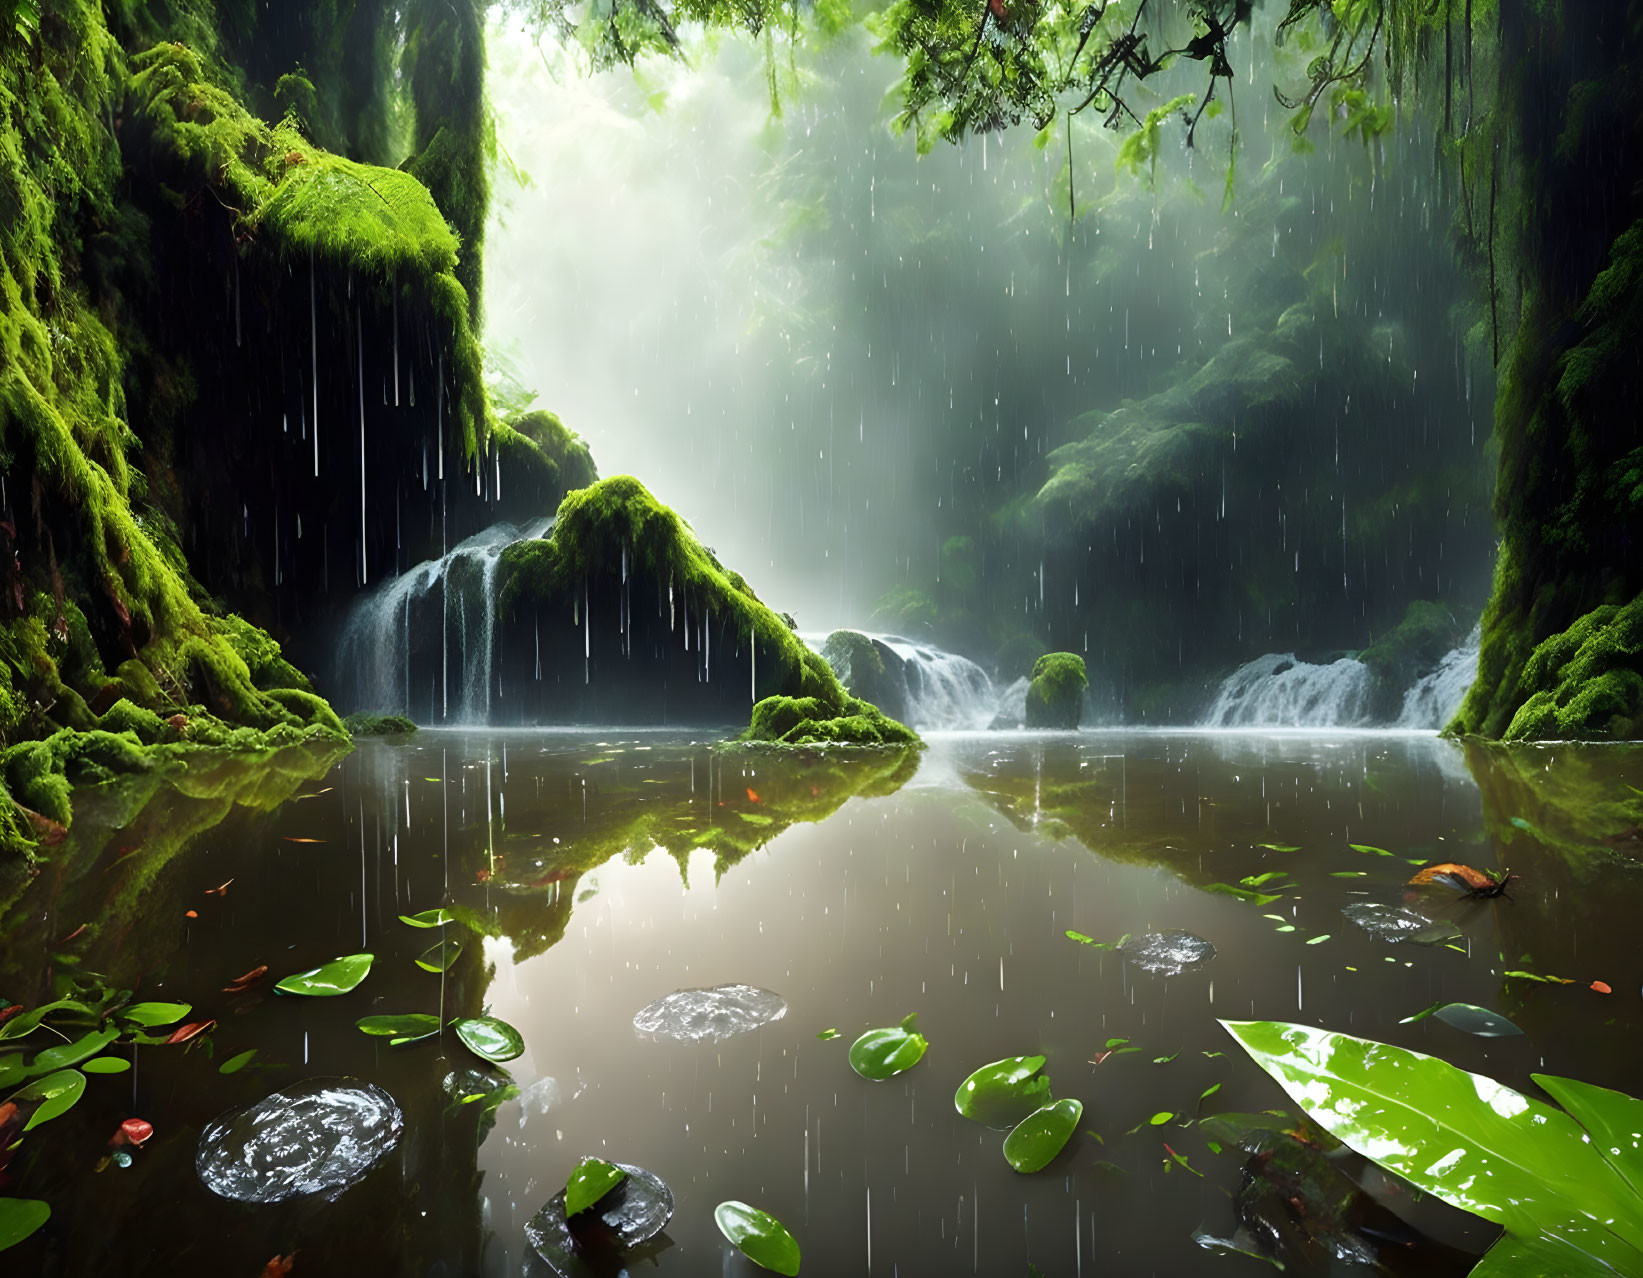 Tranquil rainforest pond with mossy rocks and waterfalls